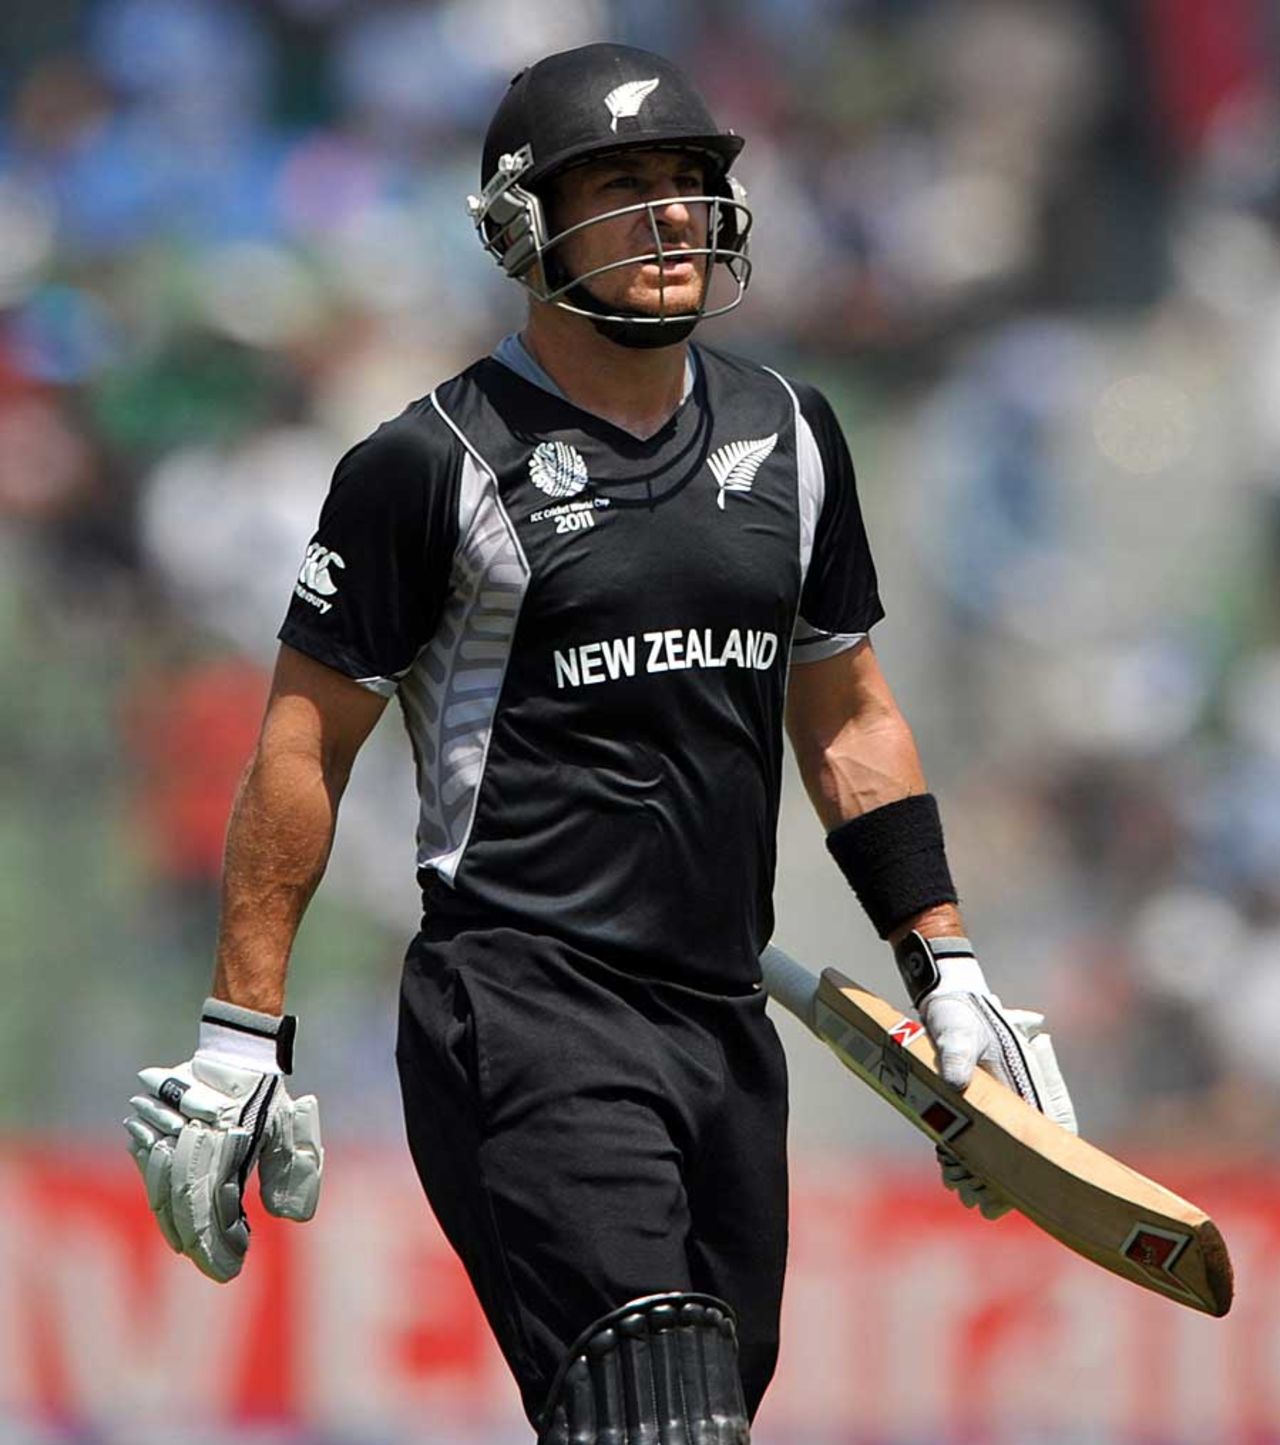 Nathan McCullum didn't last too long, Canada v New Zealand, Group A, World Cup 2011, Mumbai, March 13, 2011